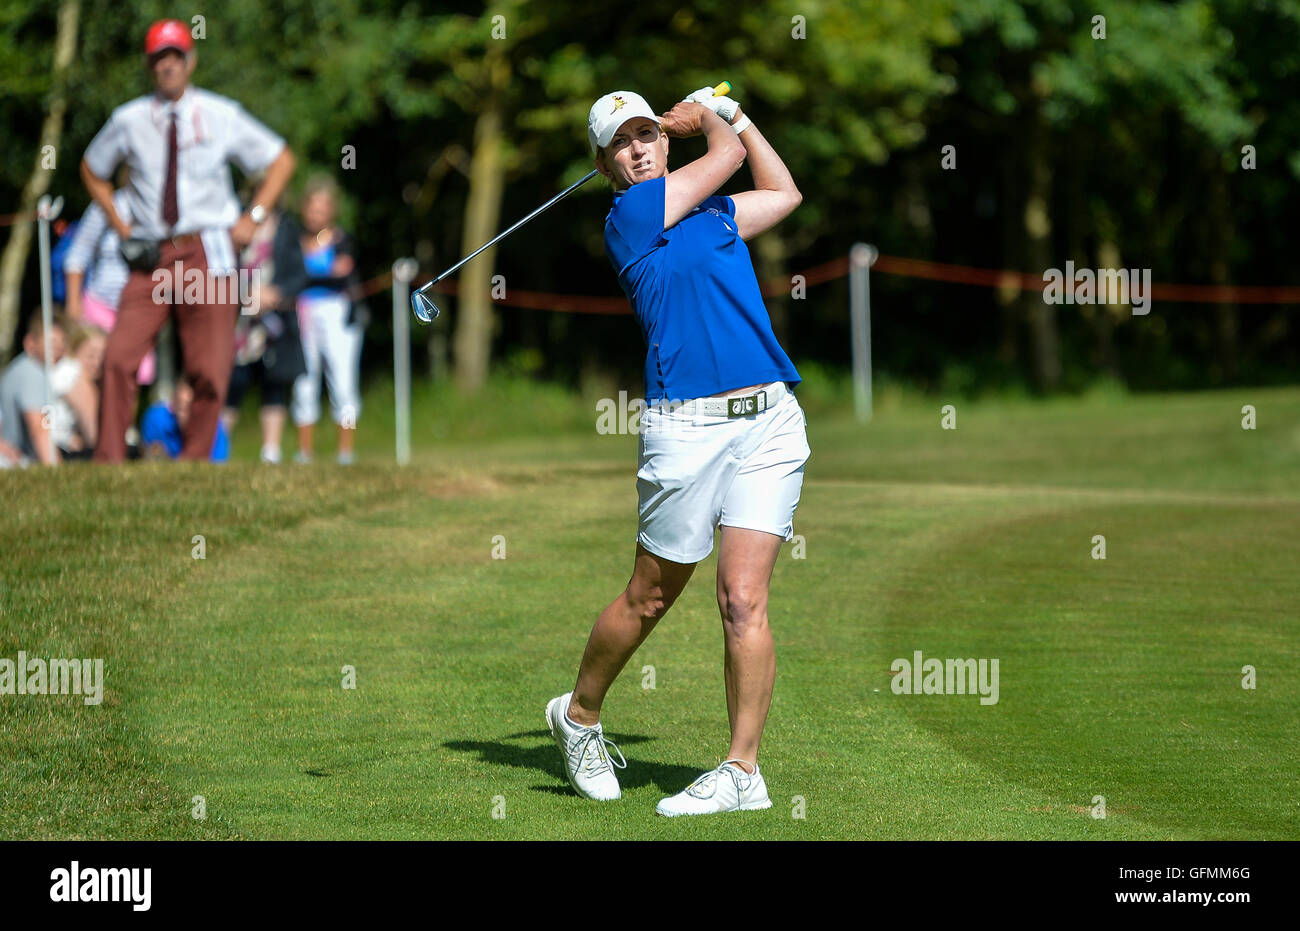 Karrie Webb Australia High Resolution Stock Photography and Images - Alamy